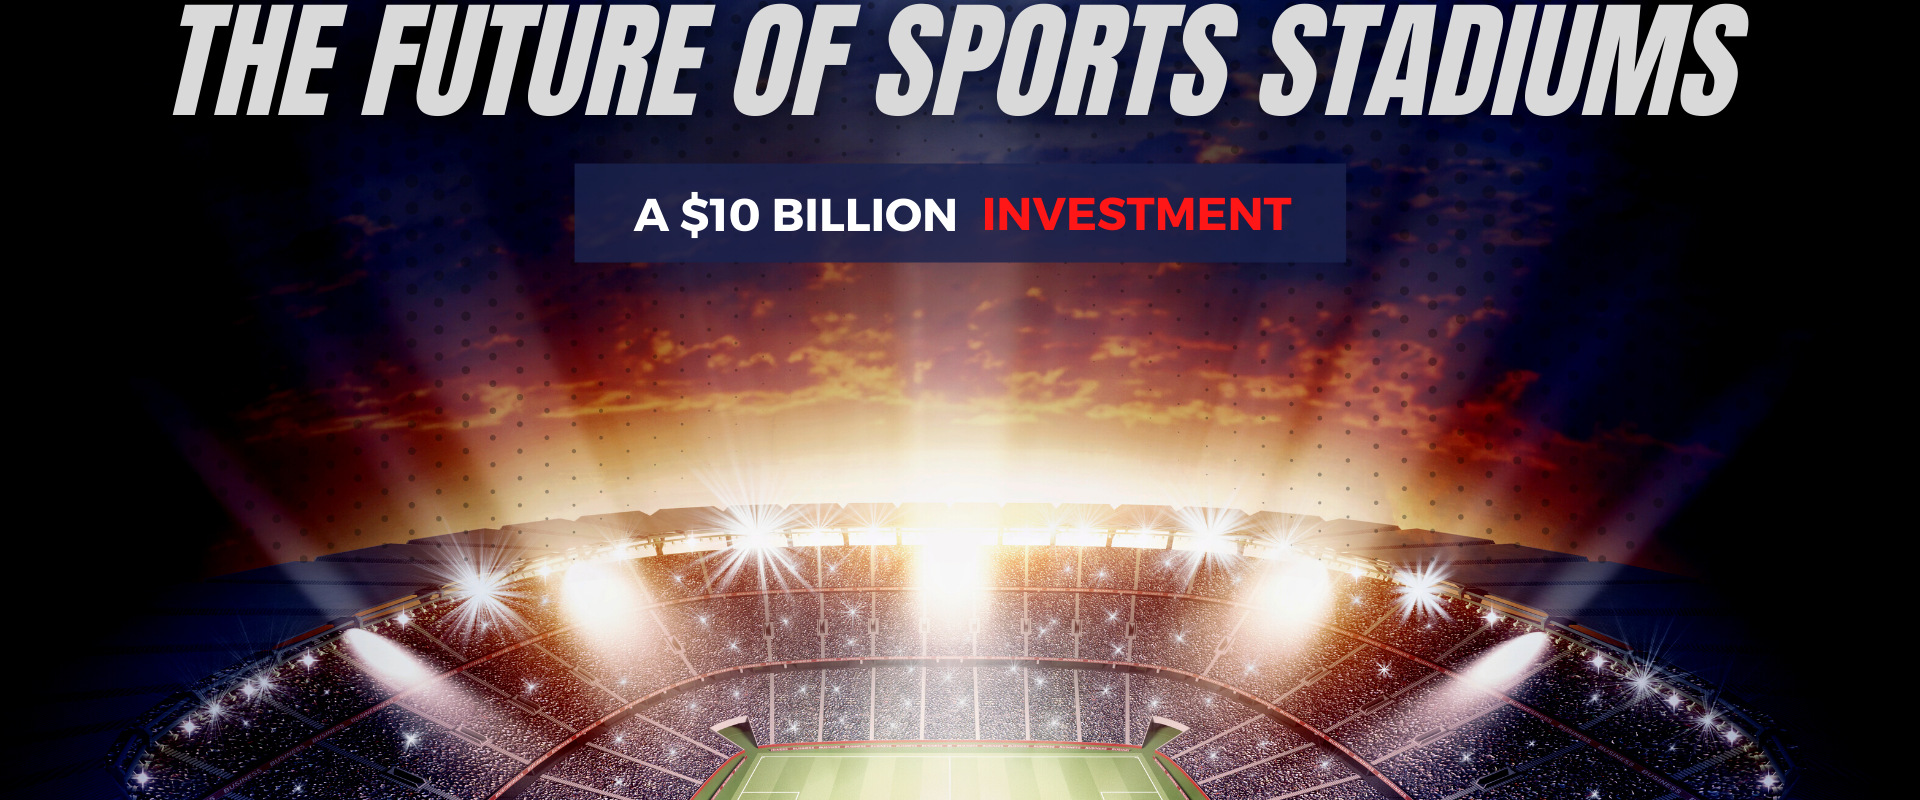 1920x1080_The future of sports stadiums - a $10 billion investment-Ron